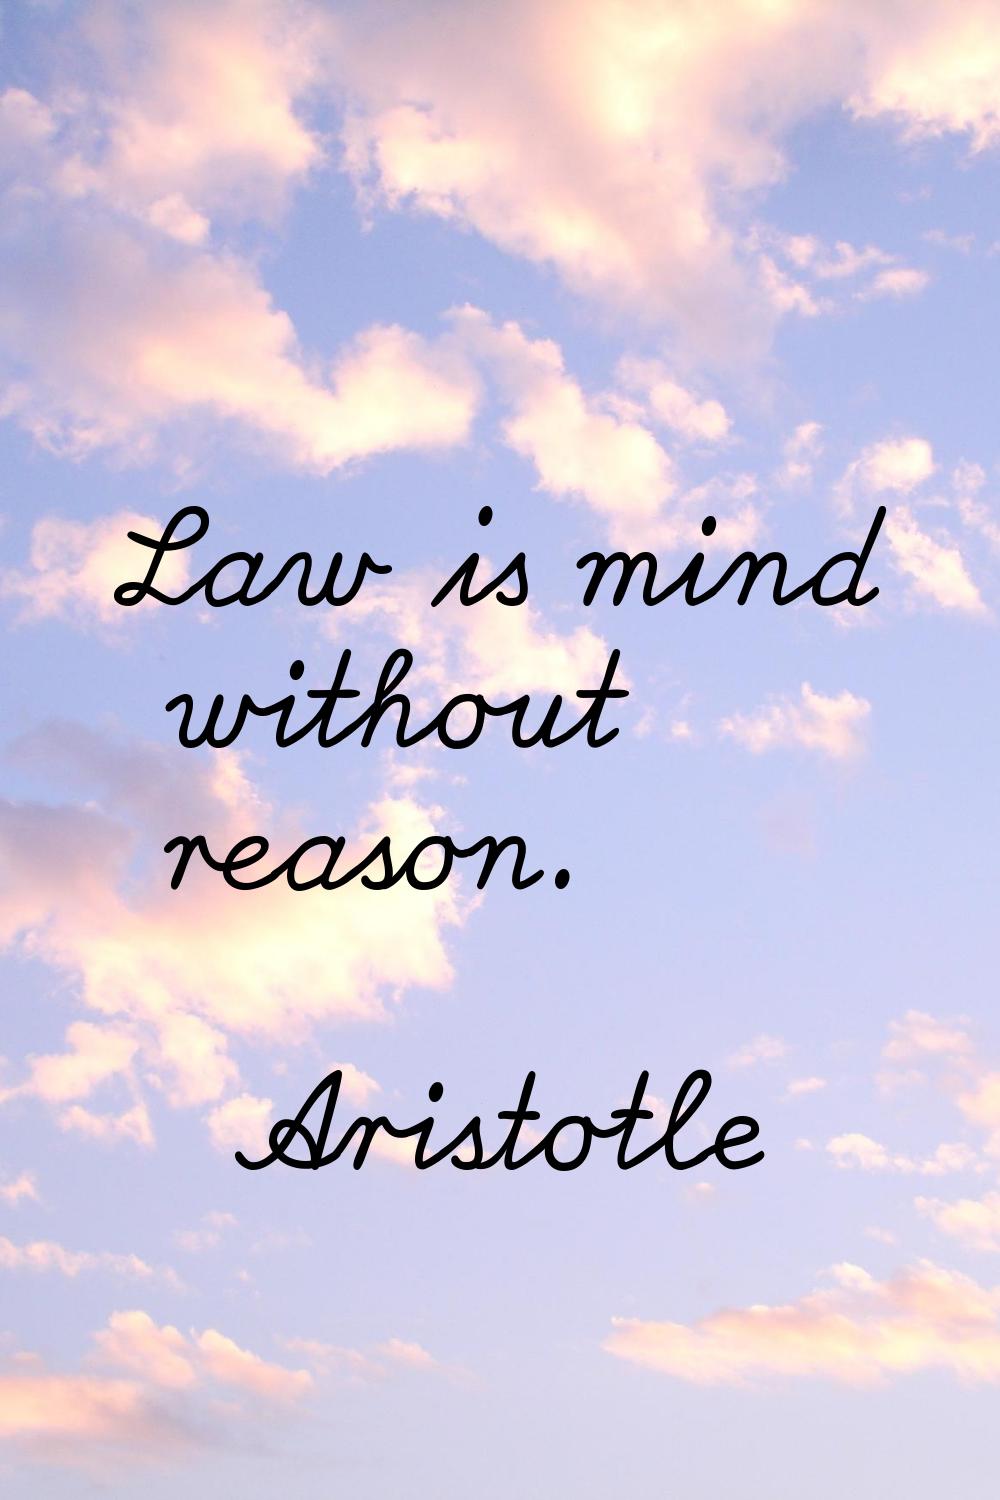 Law is mind without reason.